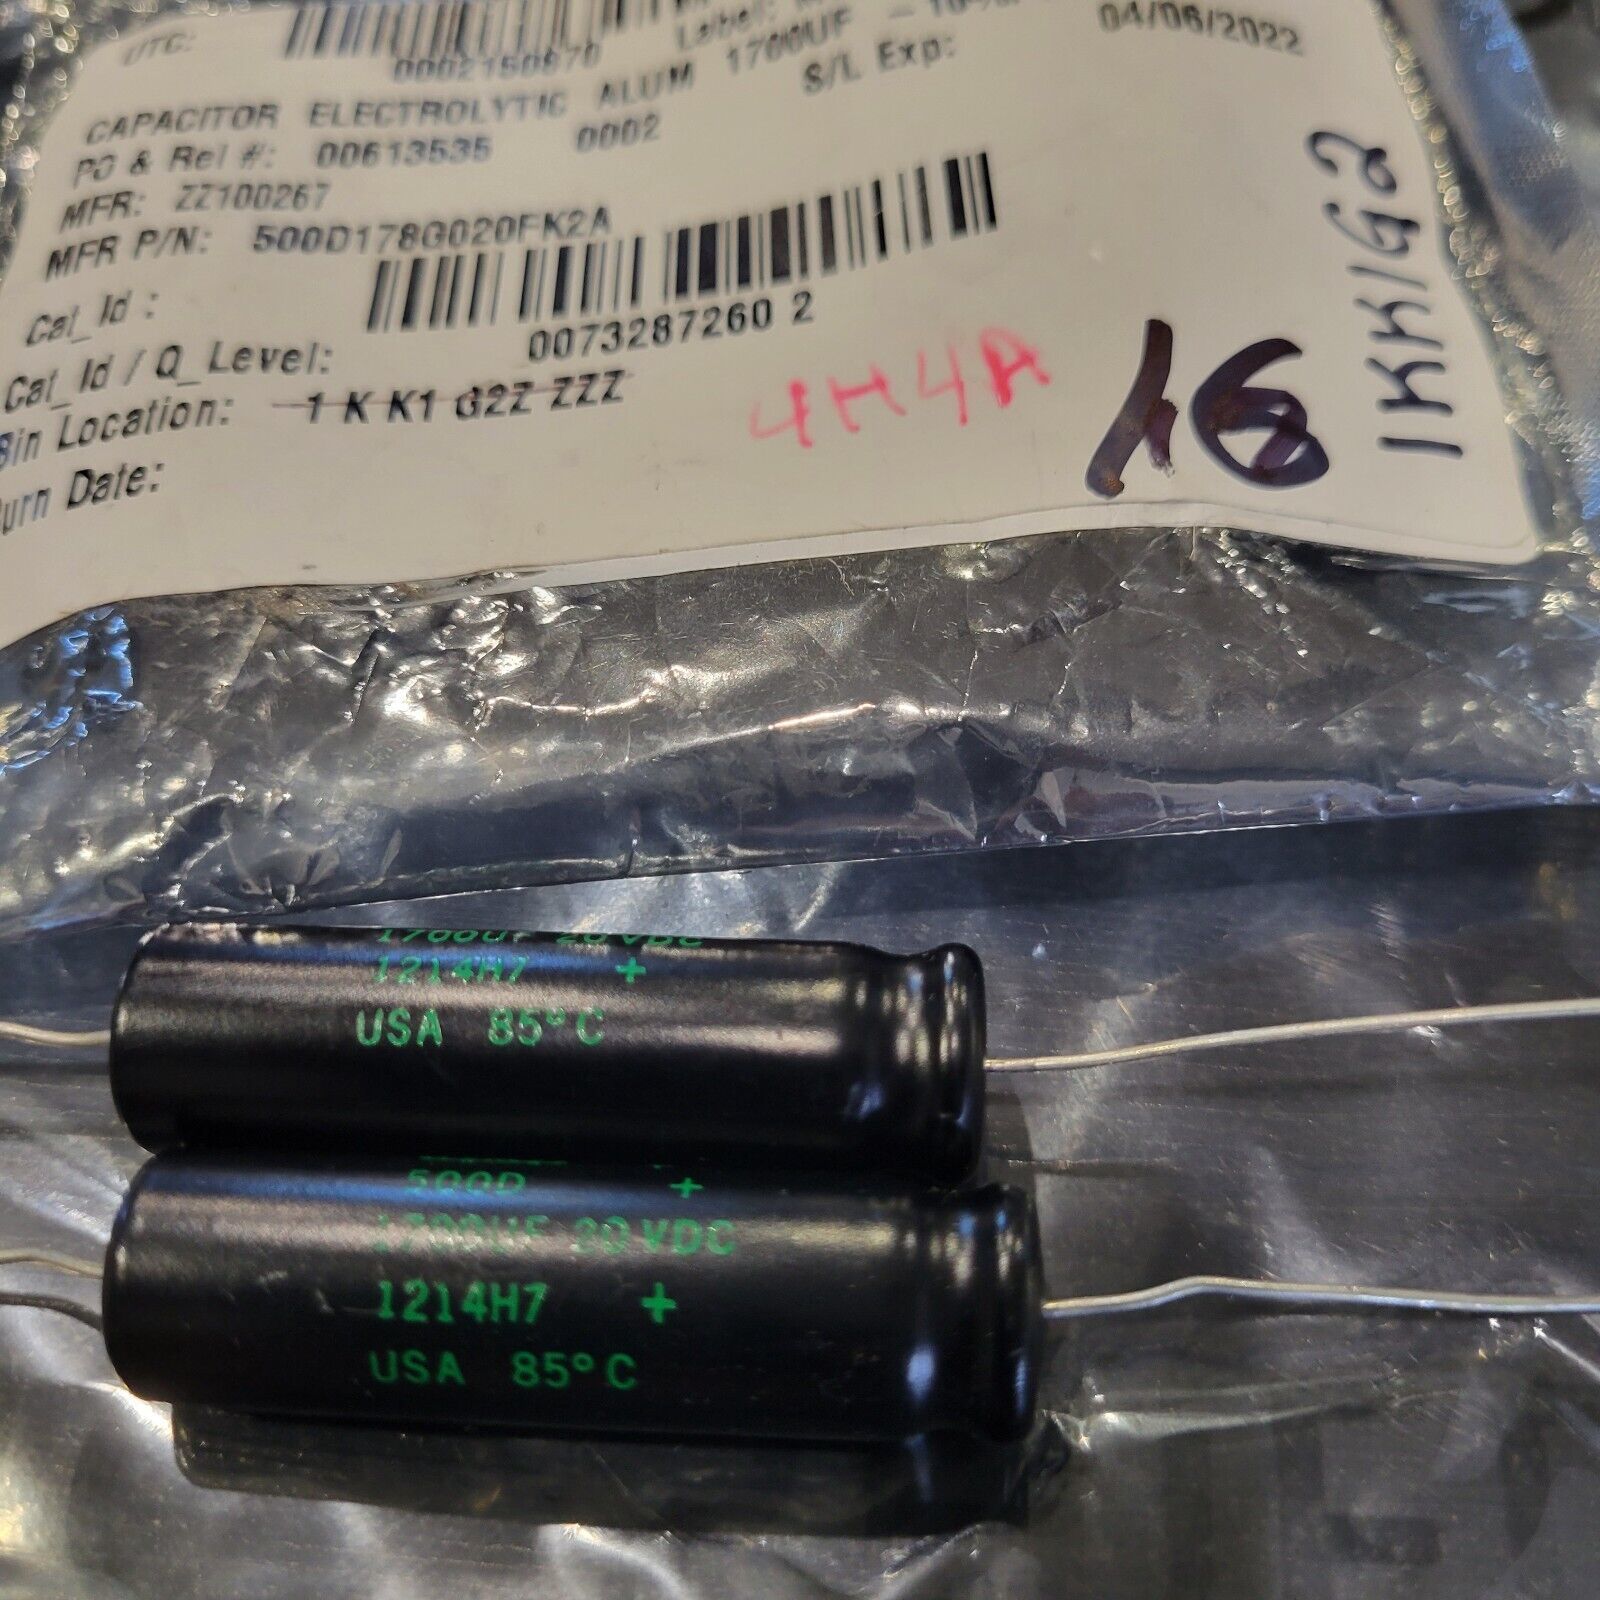 Primary image for (2) BMI 500D178G020FK2A ELECTROLYTIC ALUMINUM CAPACITOR 1700UF 20VDC 85c NEW $29